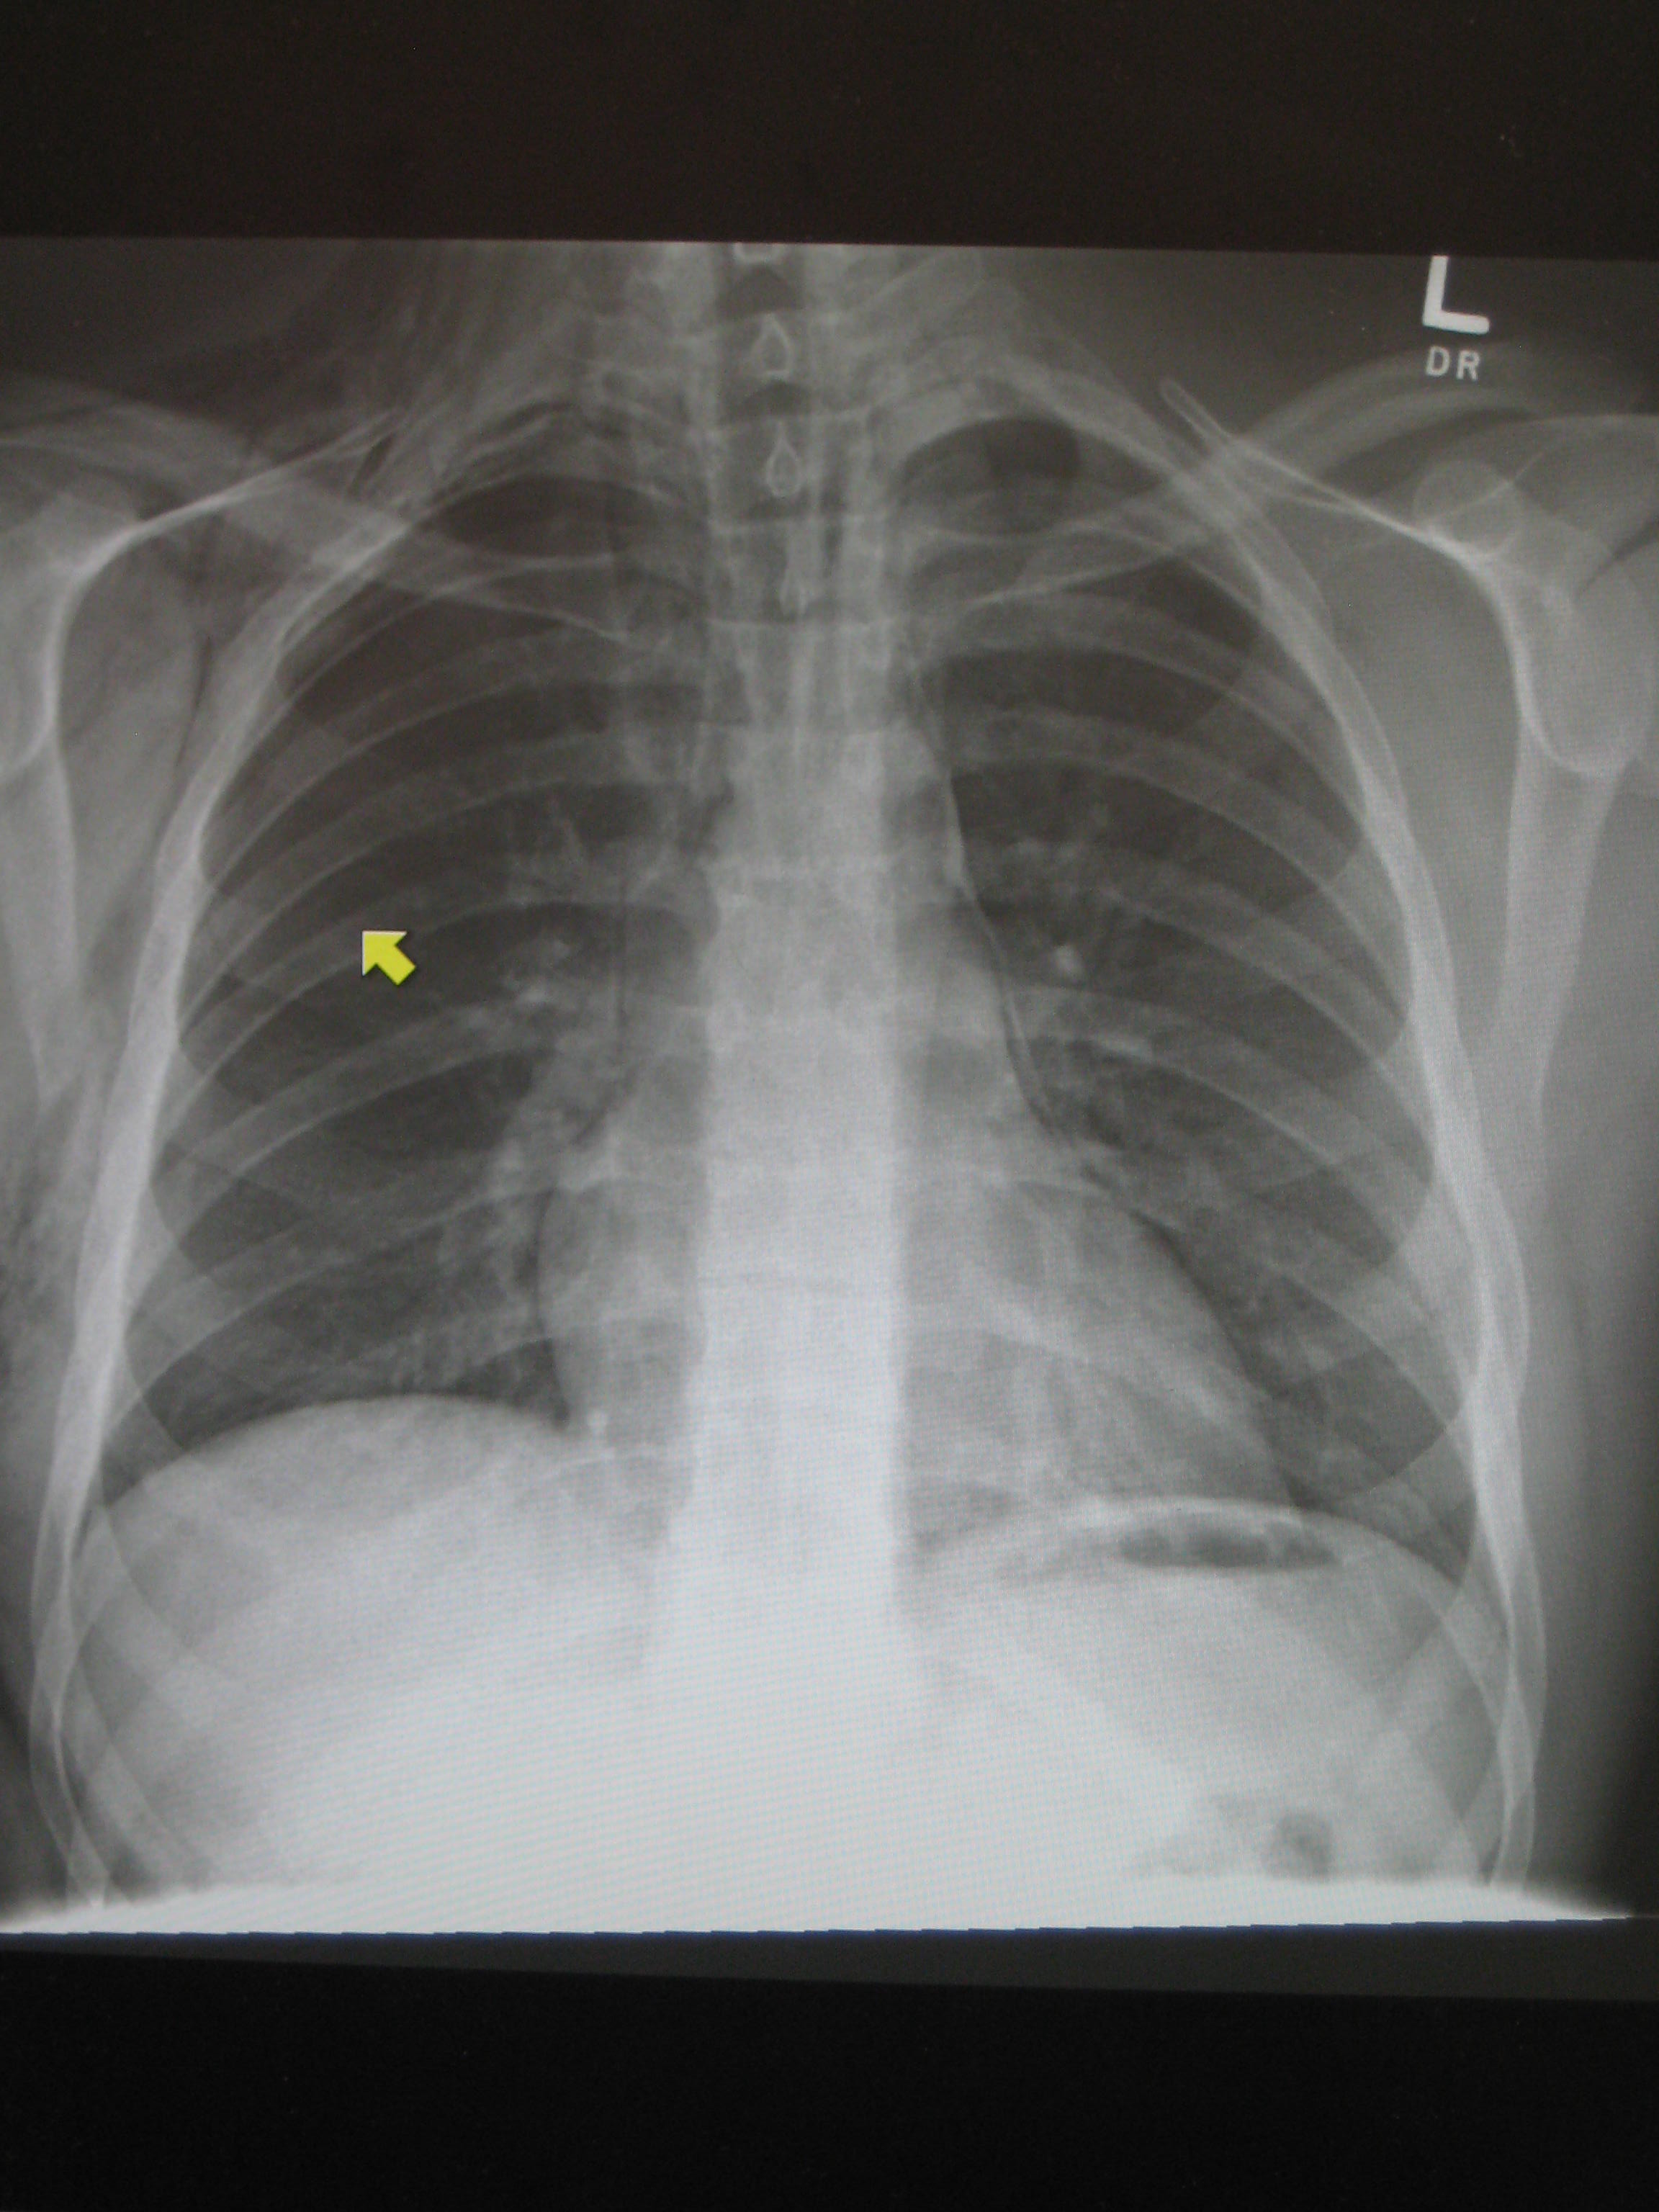 Pneumomediastinum and right sided pneumothorax post first rib fracture in a mountain biking accident.